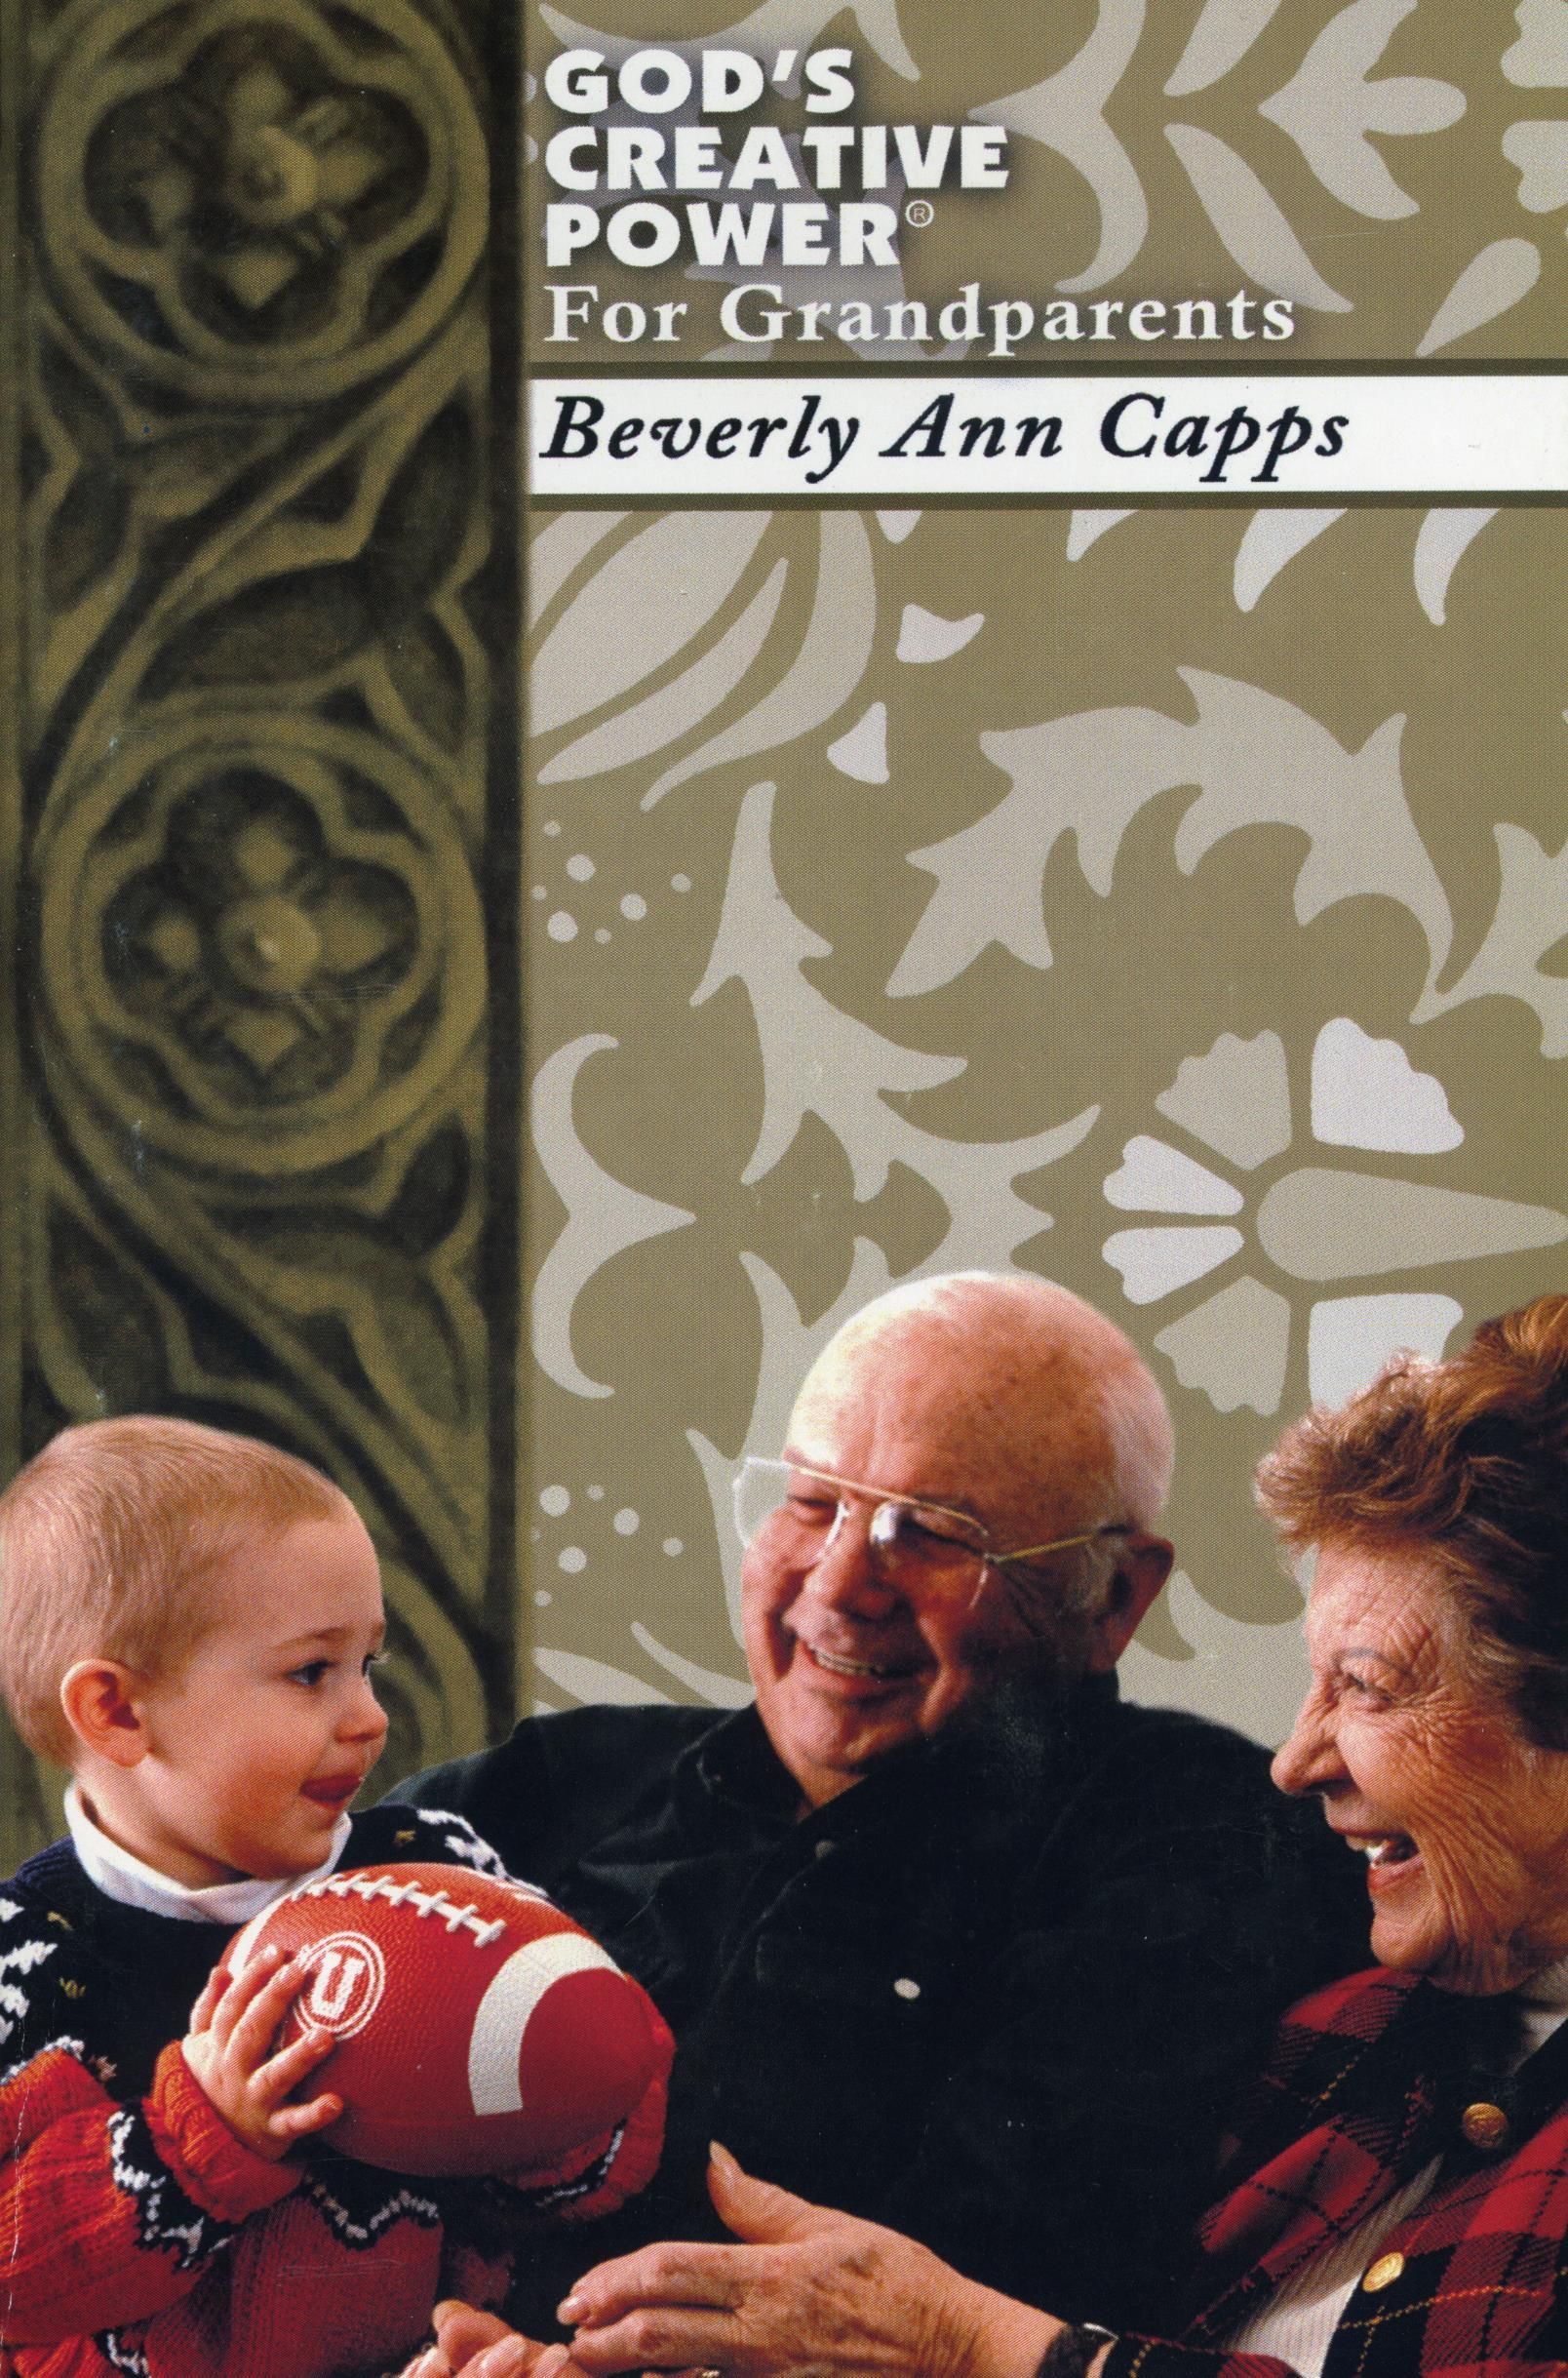 B. Capps: God's Creative Power for Grandparents